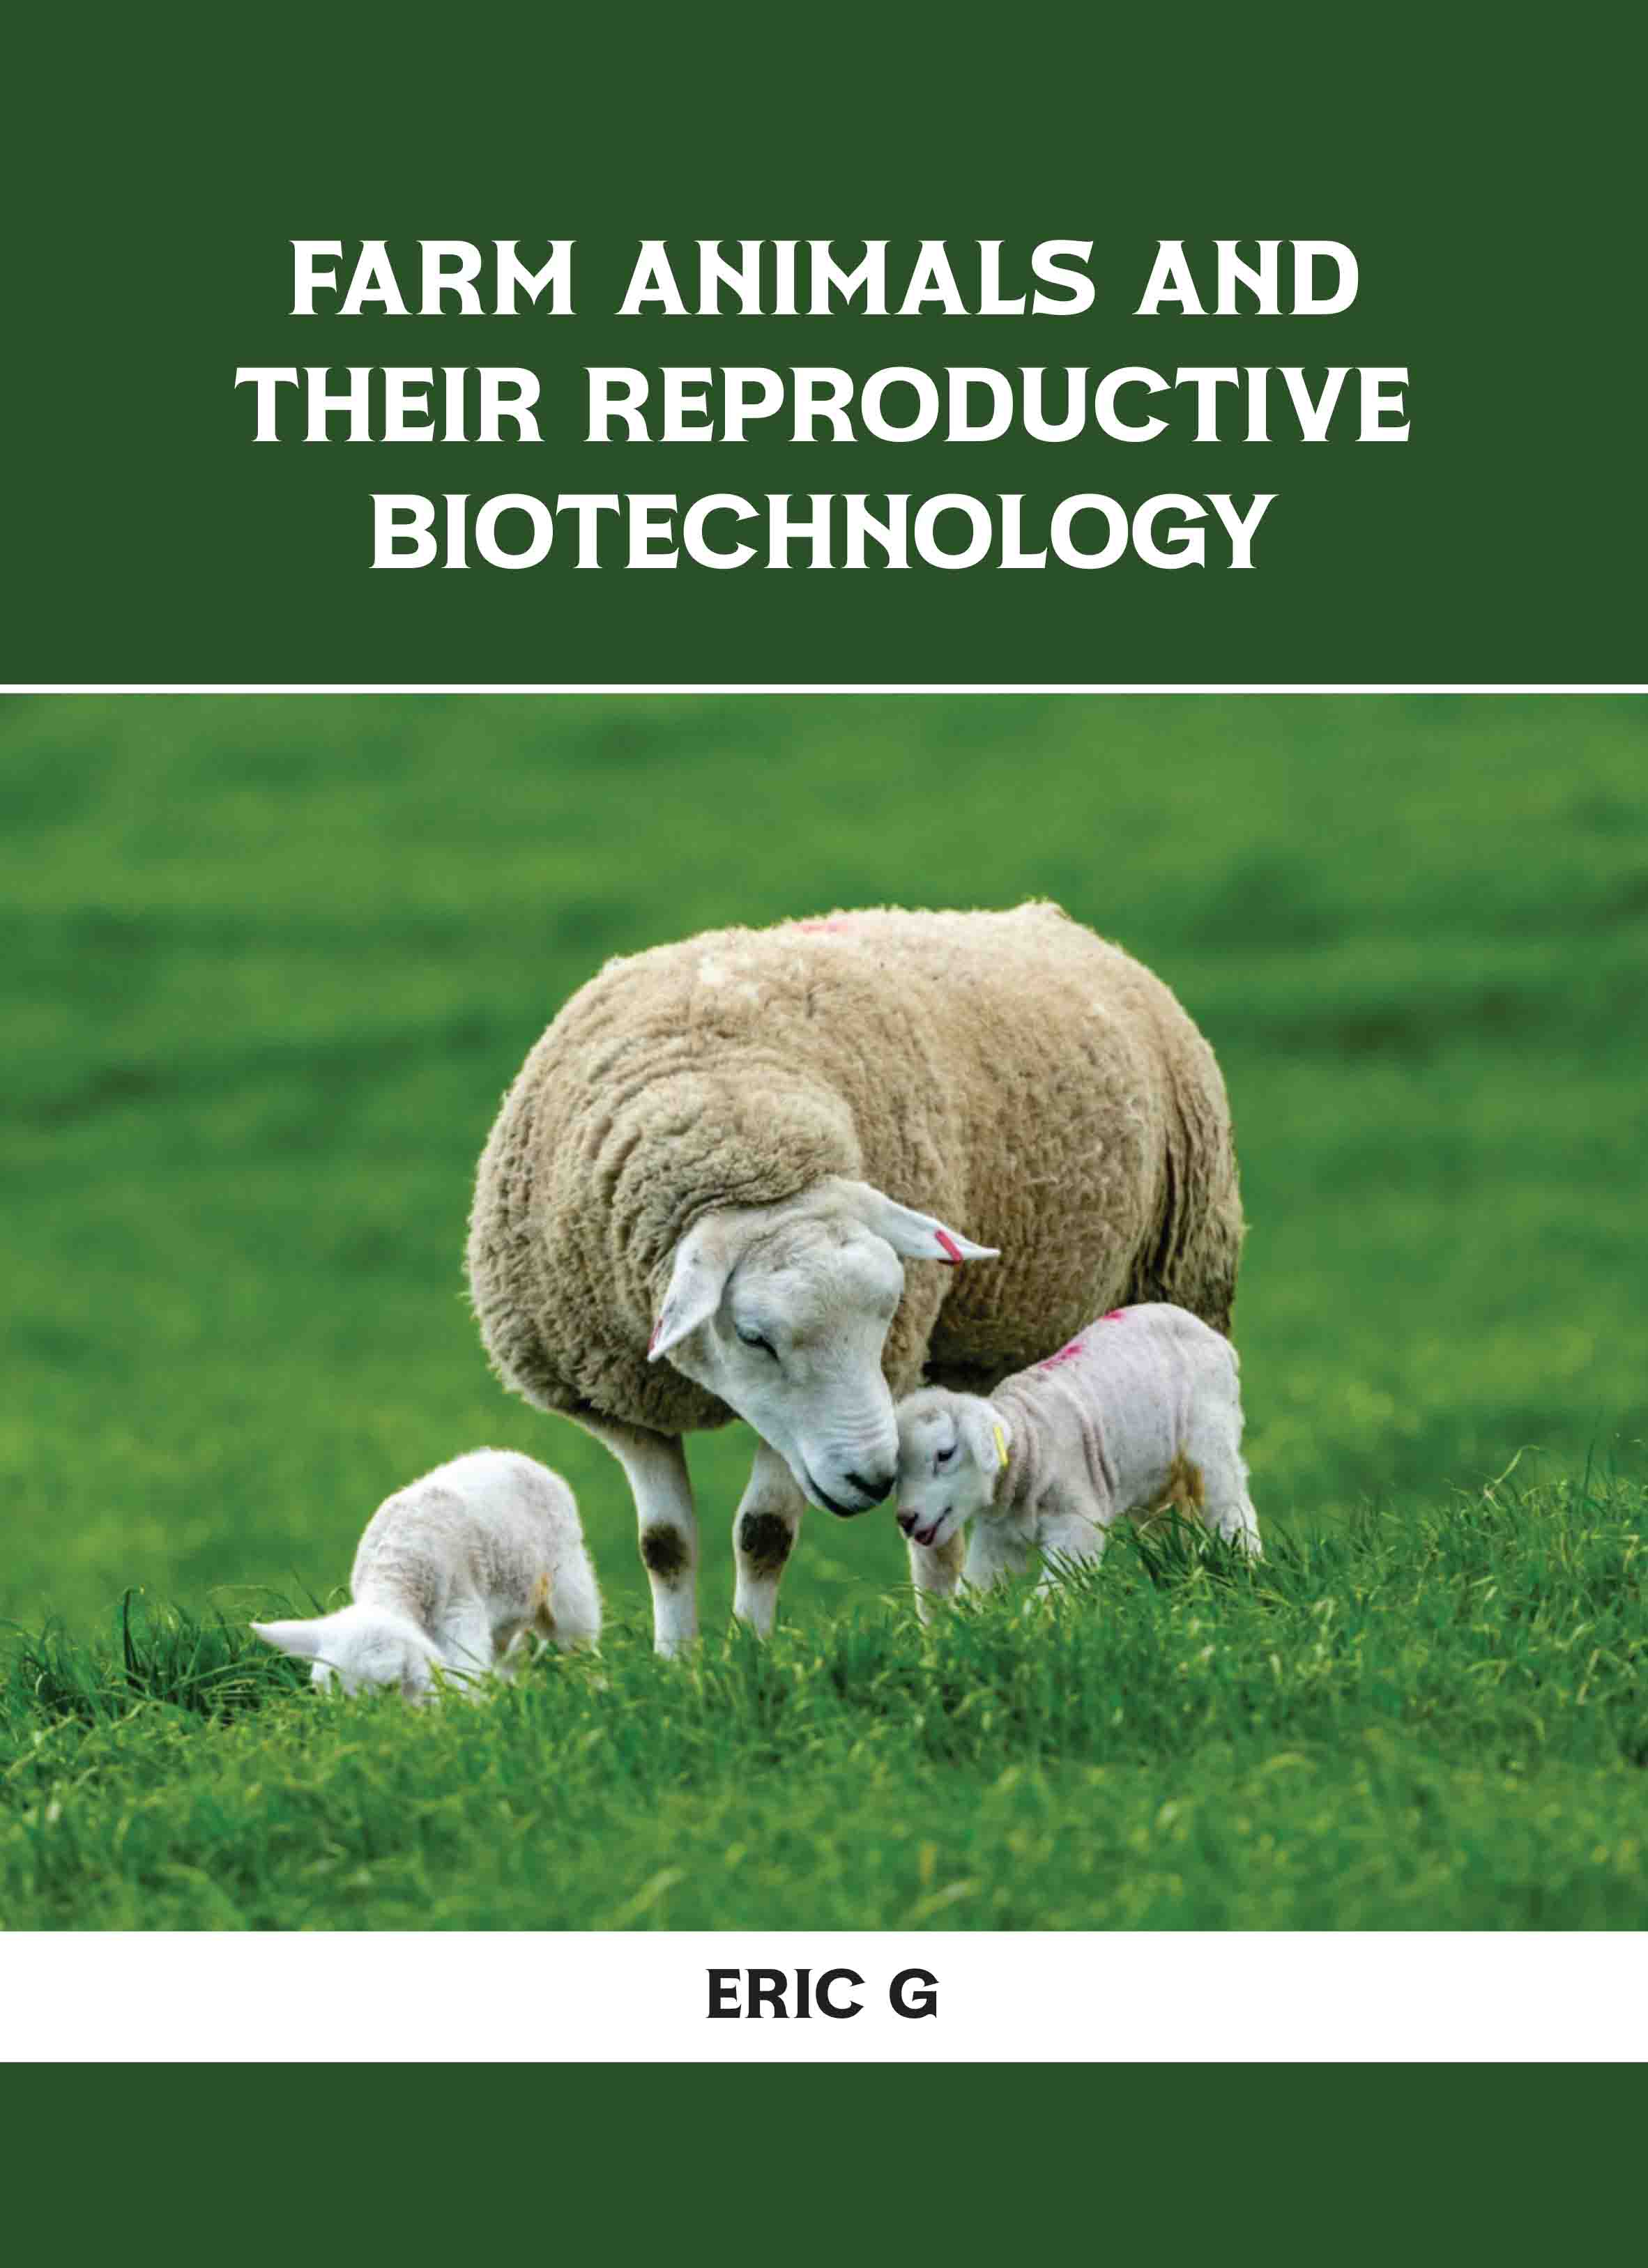 Farm Animals and their Reproductive Biotechnology